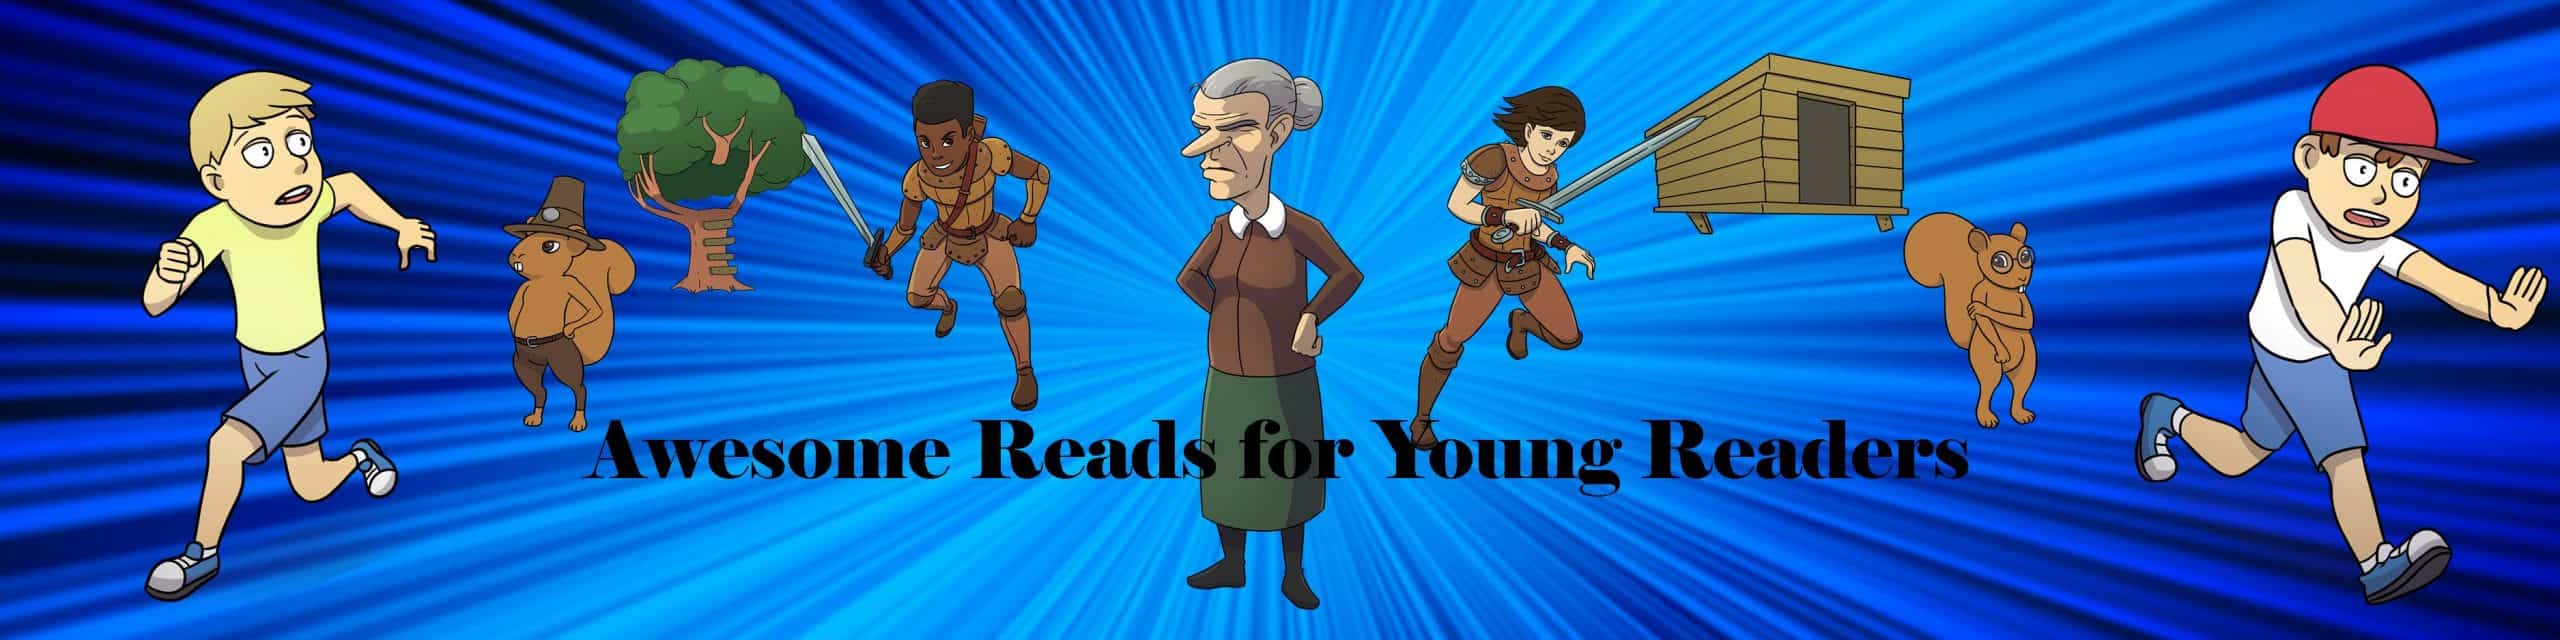 Awesome Reads for Young Readers!